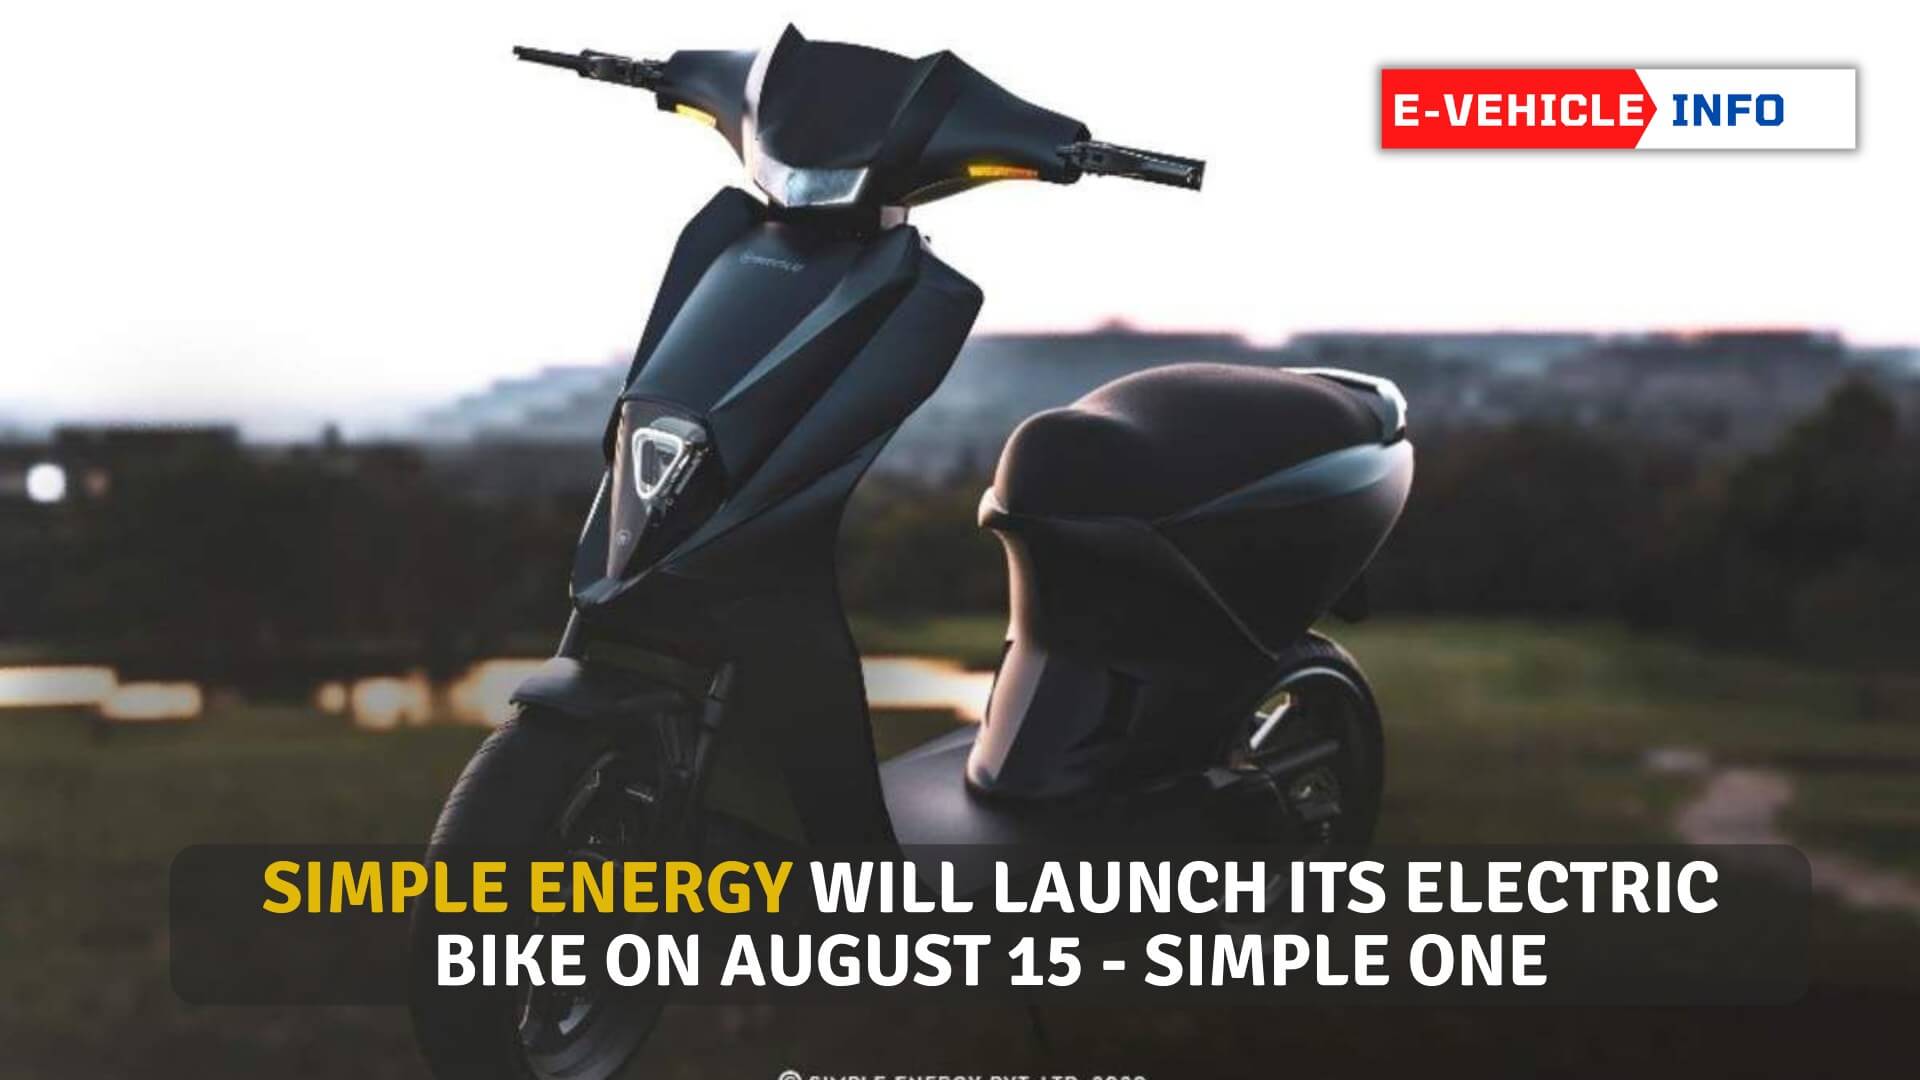 https://e-vehicleinfo.com/simple-energy-will-launch-its-electric-bike-on-august-15-simple-one/